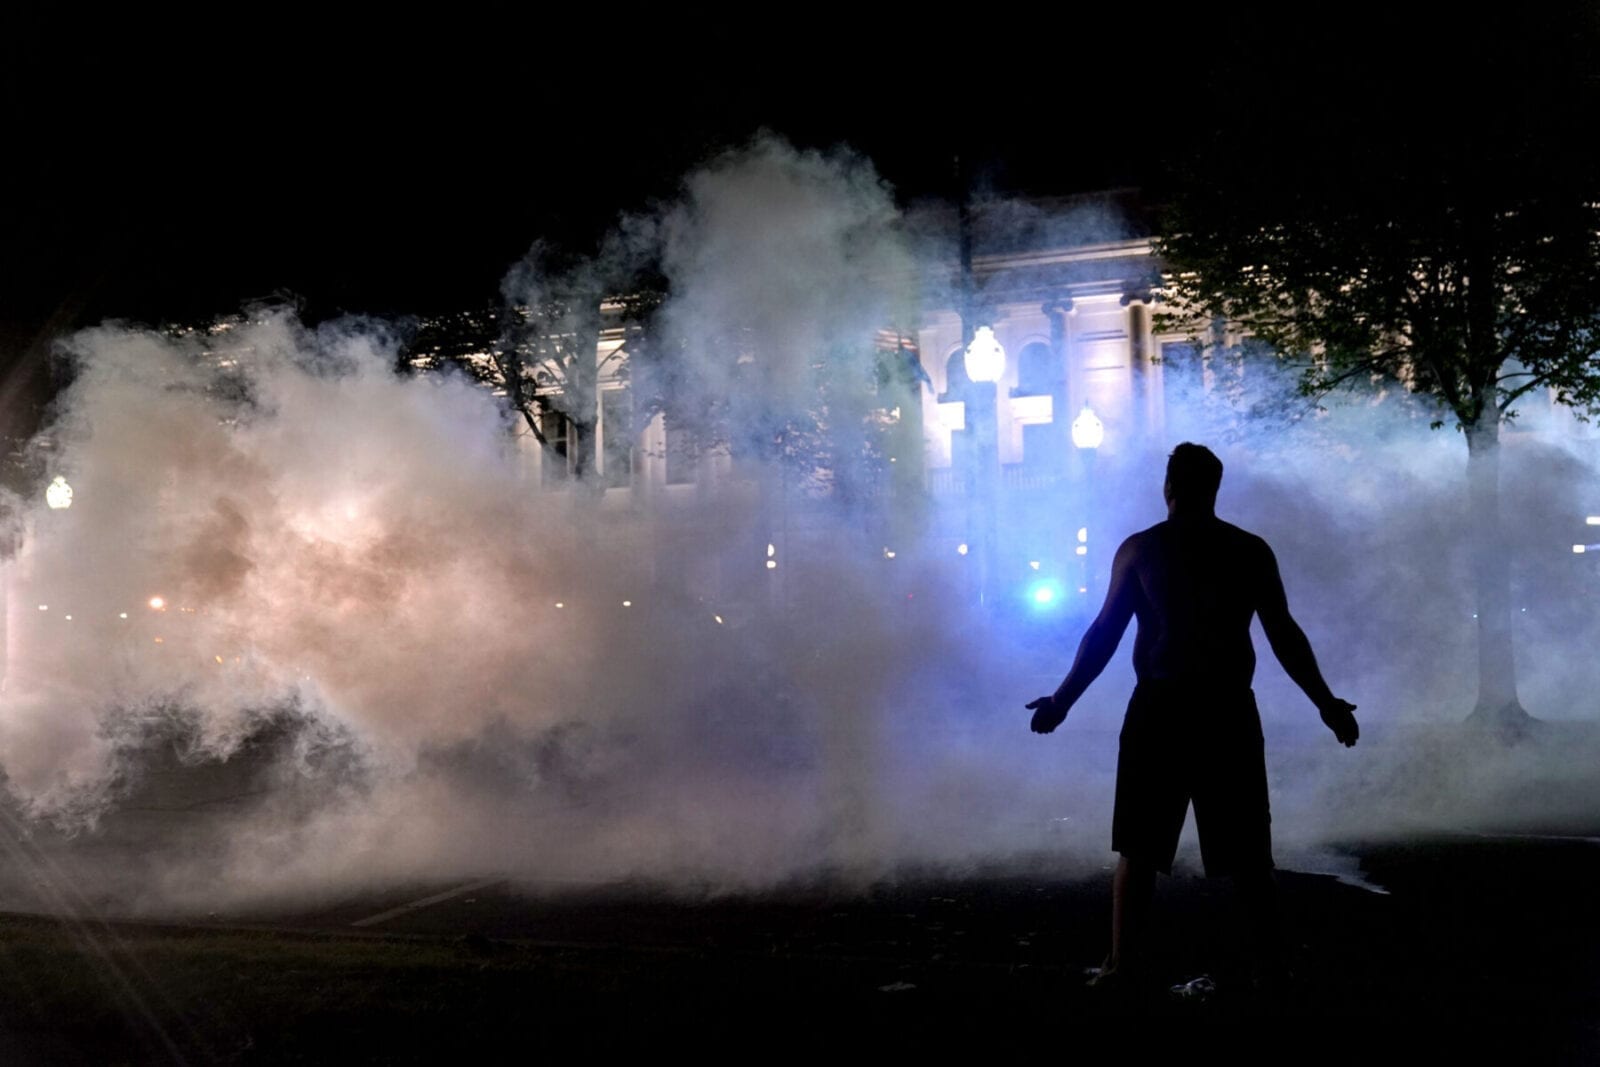 A protester attempts to continue standing through a cloud of tear gas fired by police outside the Kenosha County Courthouse, late Monday, Aug. 24, 2020, in Kenosha, Wis. Protesters converged on the county courthouse during a second night of clashes after the police shooting of Jacob Blake a day earlier turned Kenosha into the nation's latest flashpoint city in a summer of racial unrest. (AP Photo/David Goldman)